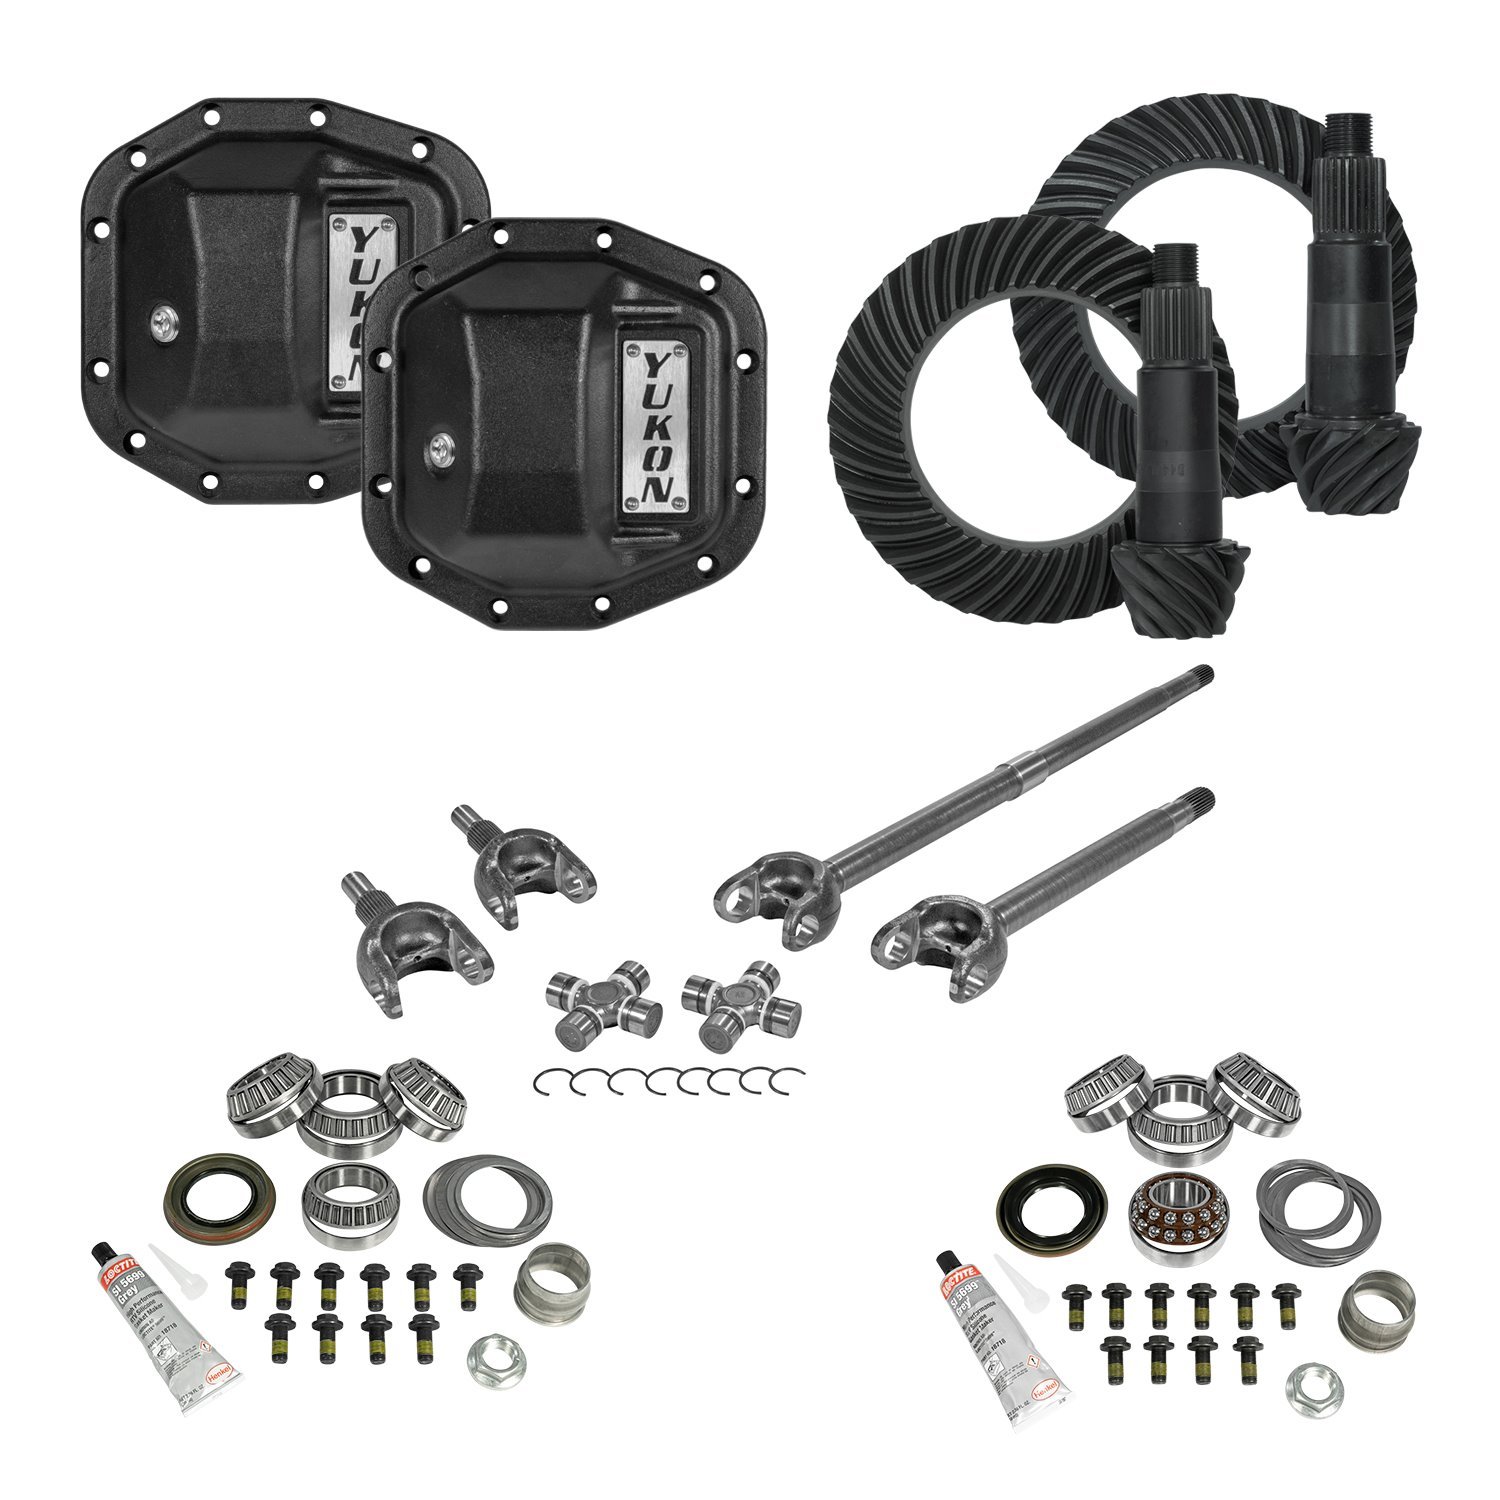 Stage 3 Jeep Jl Re-Gear Kit W/Covers, Front Axles, Dana 30/35, 4.56 Ratio